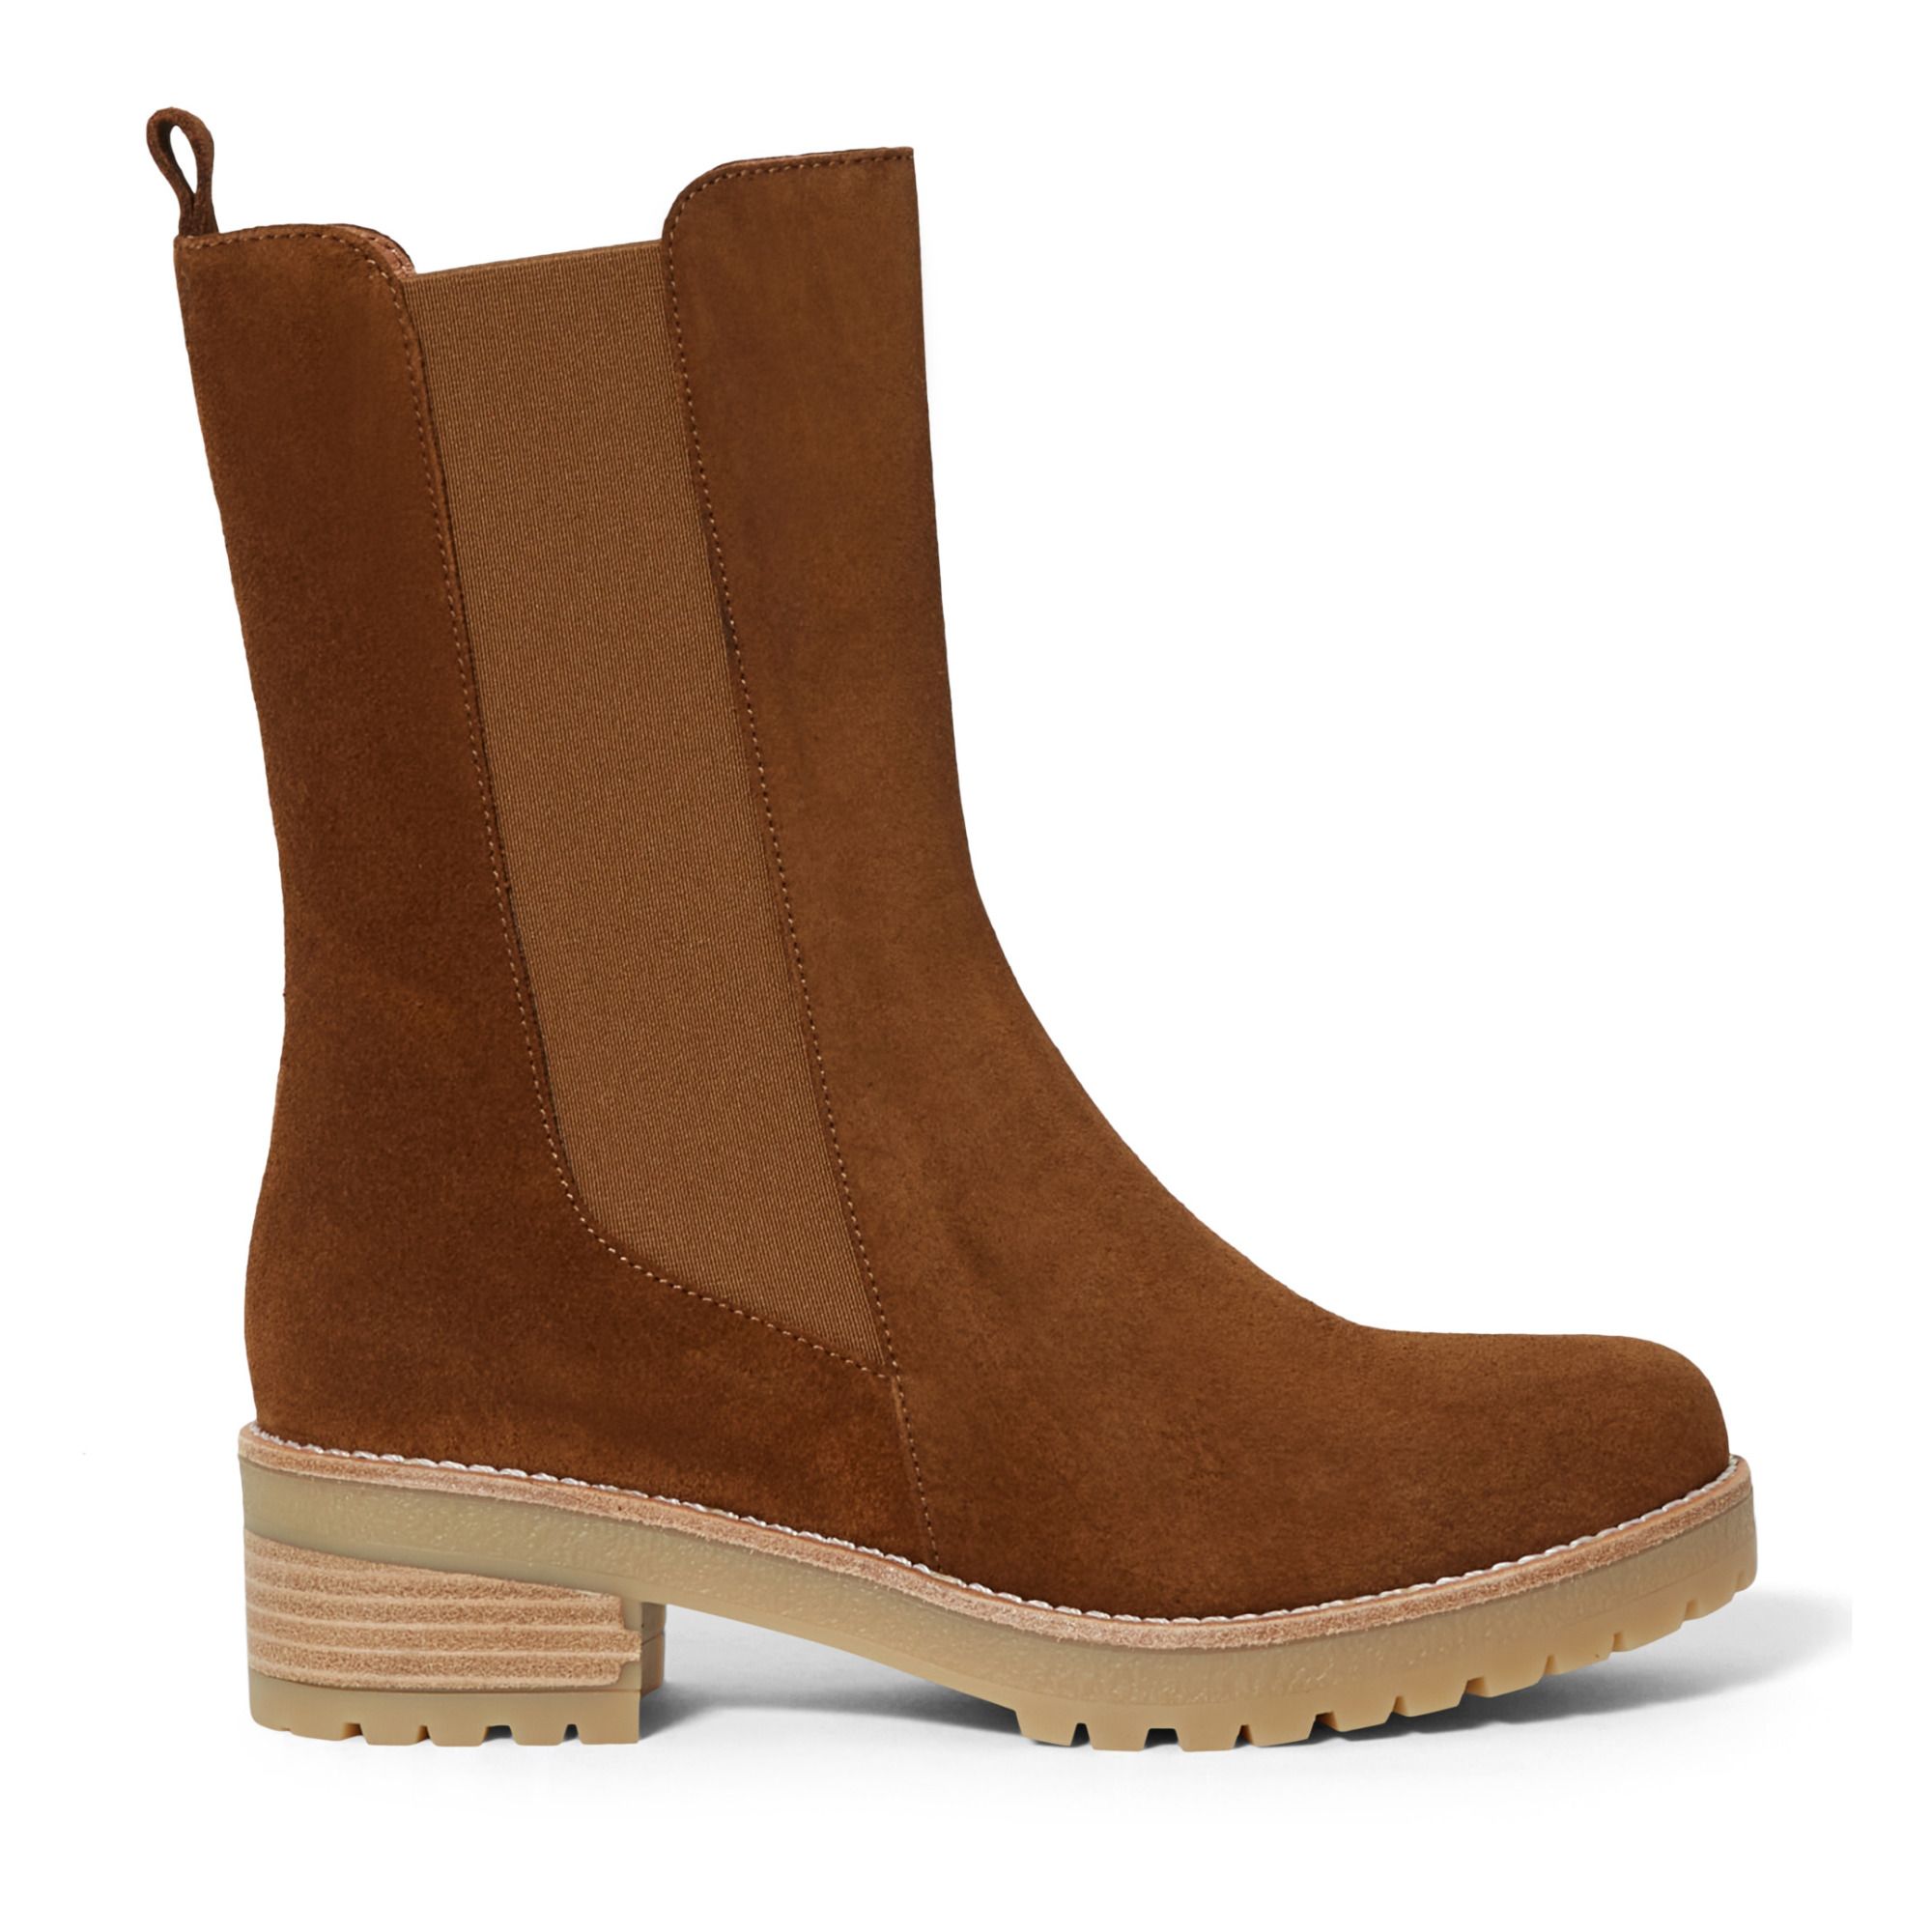 Sessun - Chelsea Boots Louisalta Cuir Suede - Femme - Tabac